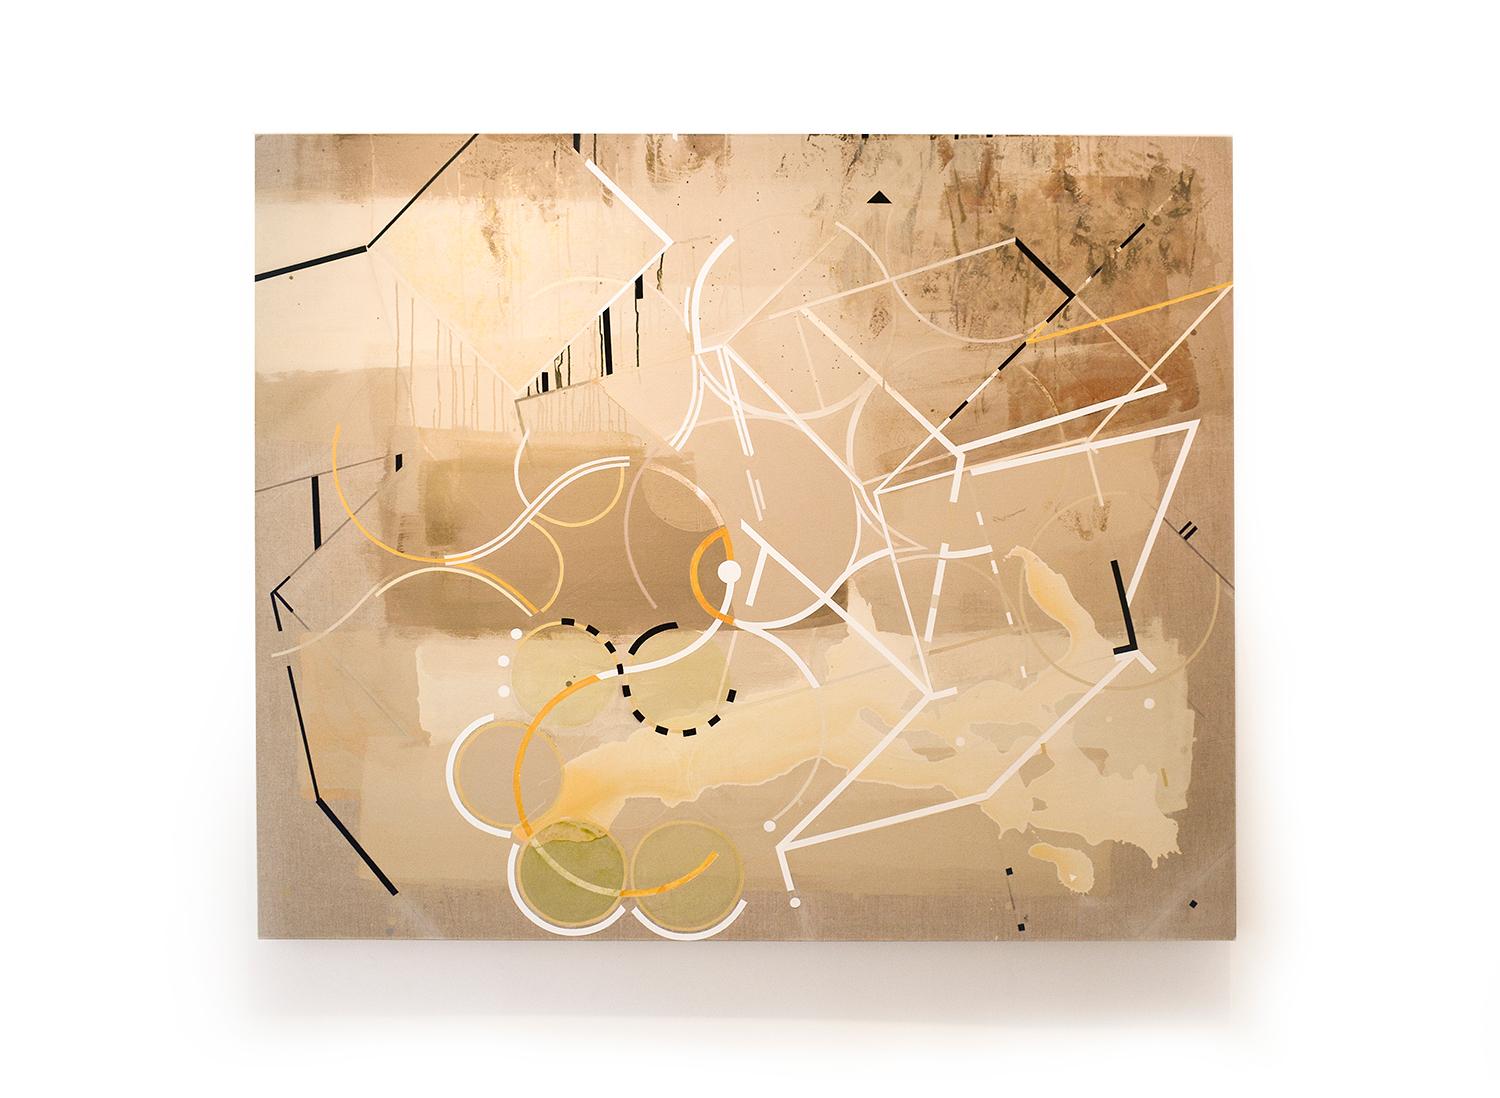 Geometric and gestural abstract painting on linen in earth tones of beige, tan, light brown, gold, with details of white and black
